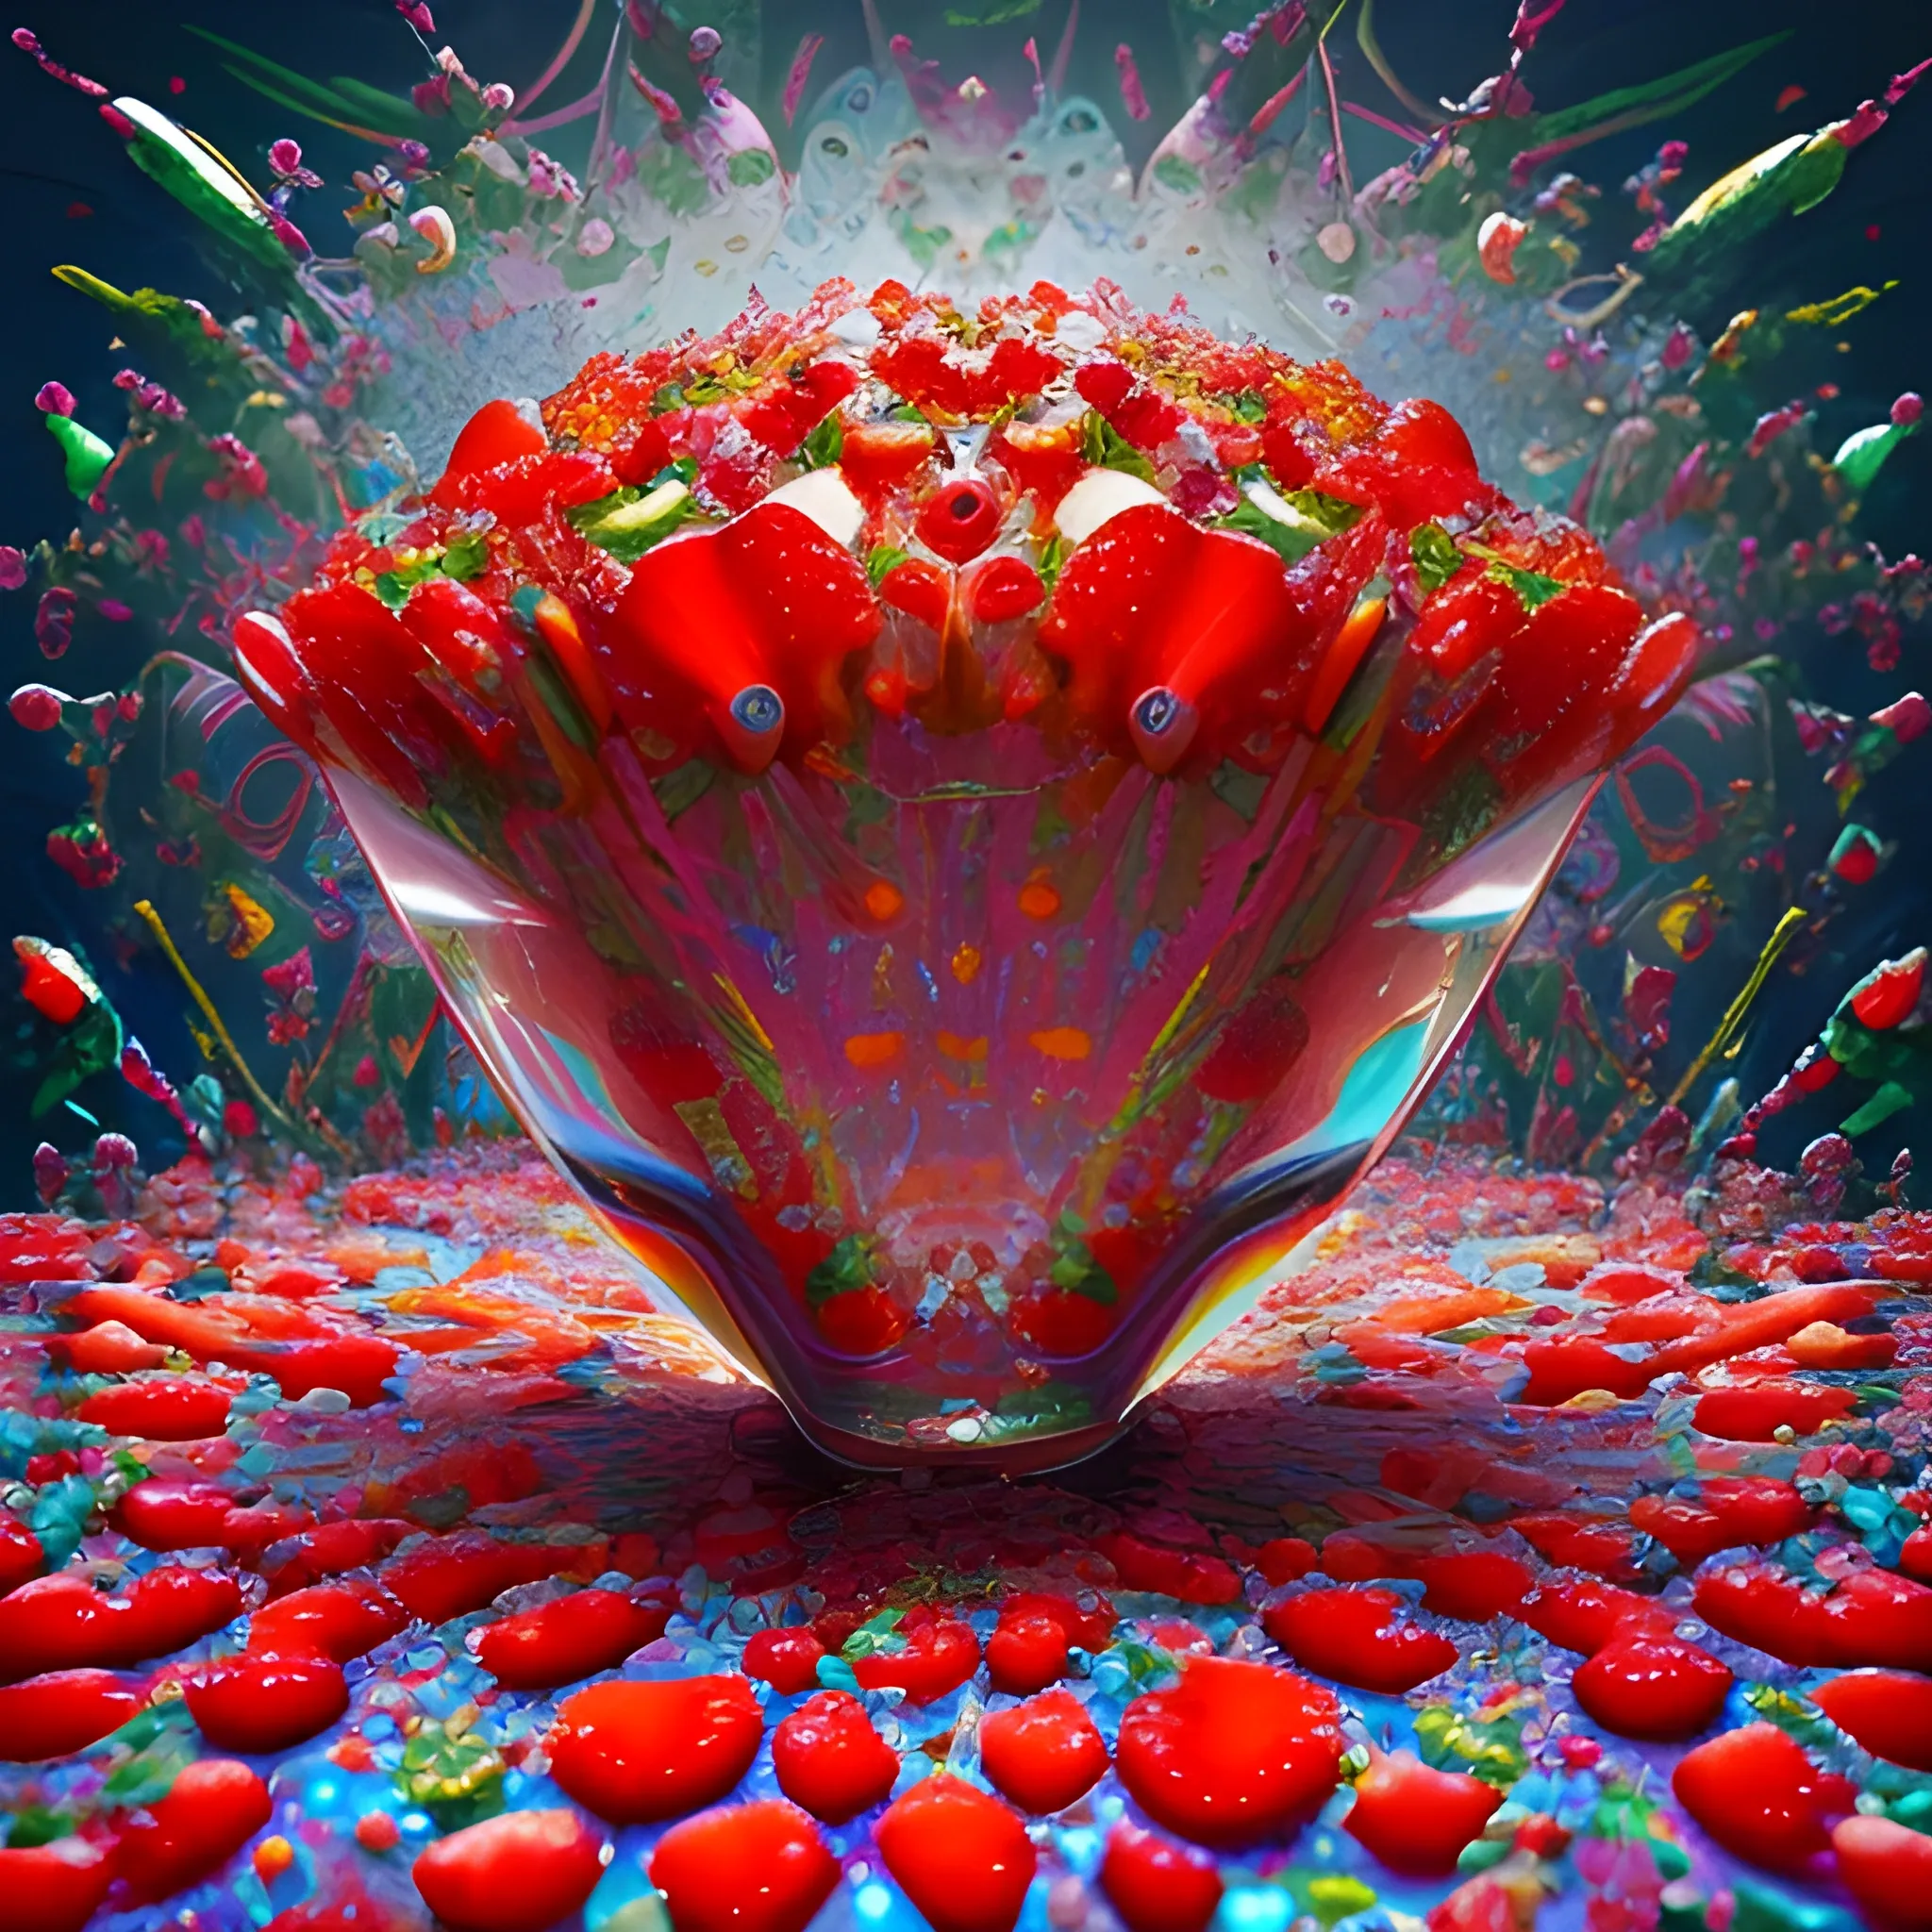 make a sculpture of many crystal crazy strawberries with human faces, poppies around, many broken glass in the air, saturated colors
surrealism, chaotic background, 3D, Trippy,  eerie atmosphere, close up, Oil Painting, aerial perspective